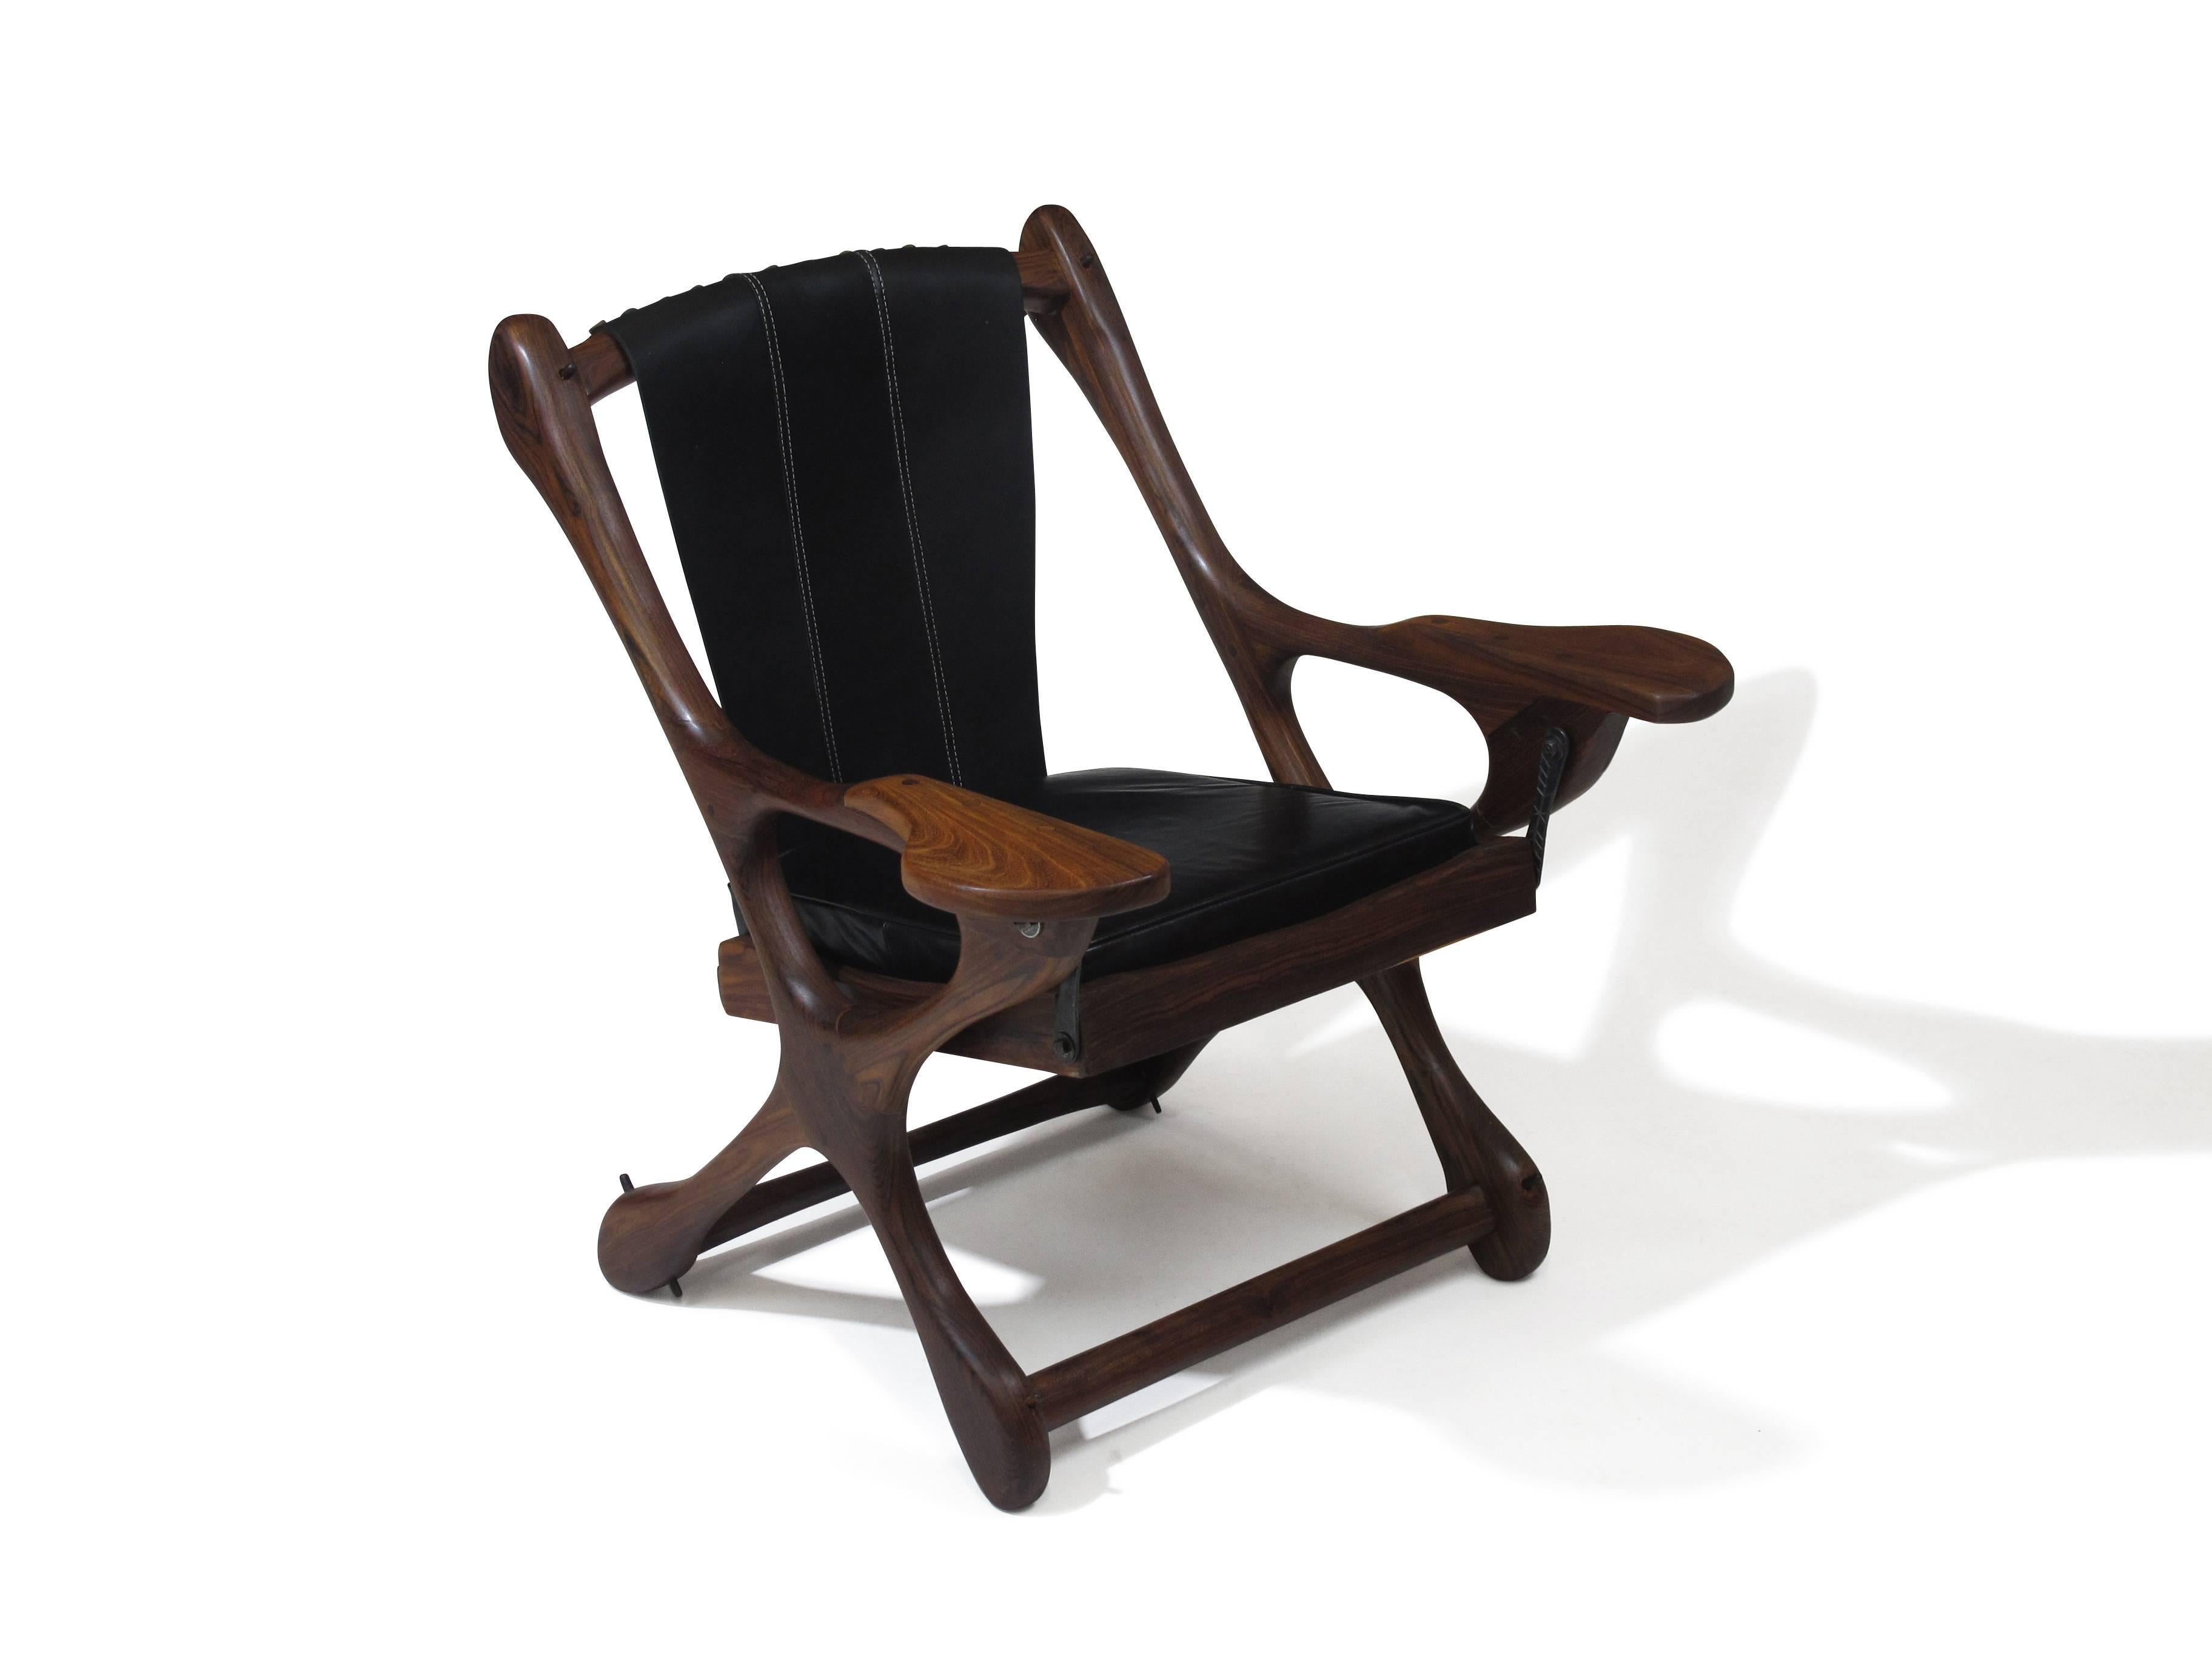 Oiled Don Shoemaker Cocobolo Rosewood Swinger Chair